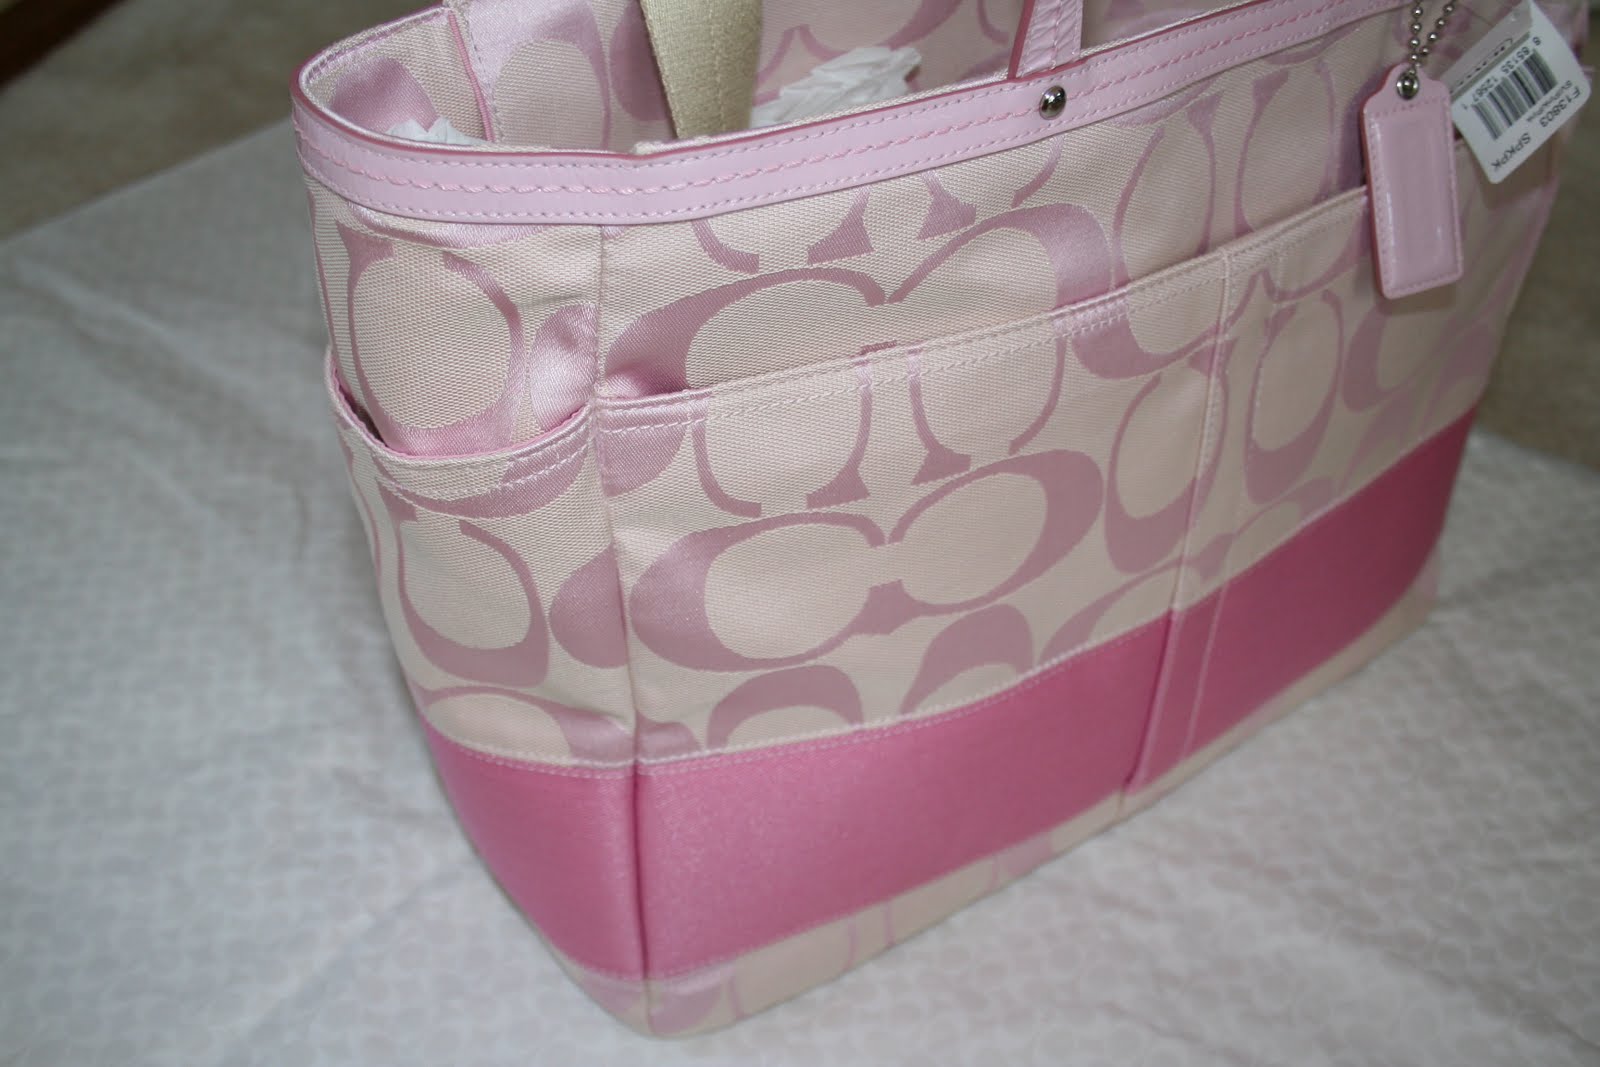 Luxury Bags For Sale: NWT Coach Signature Laptop/Diaper Bag (Pink)- #13803